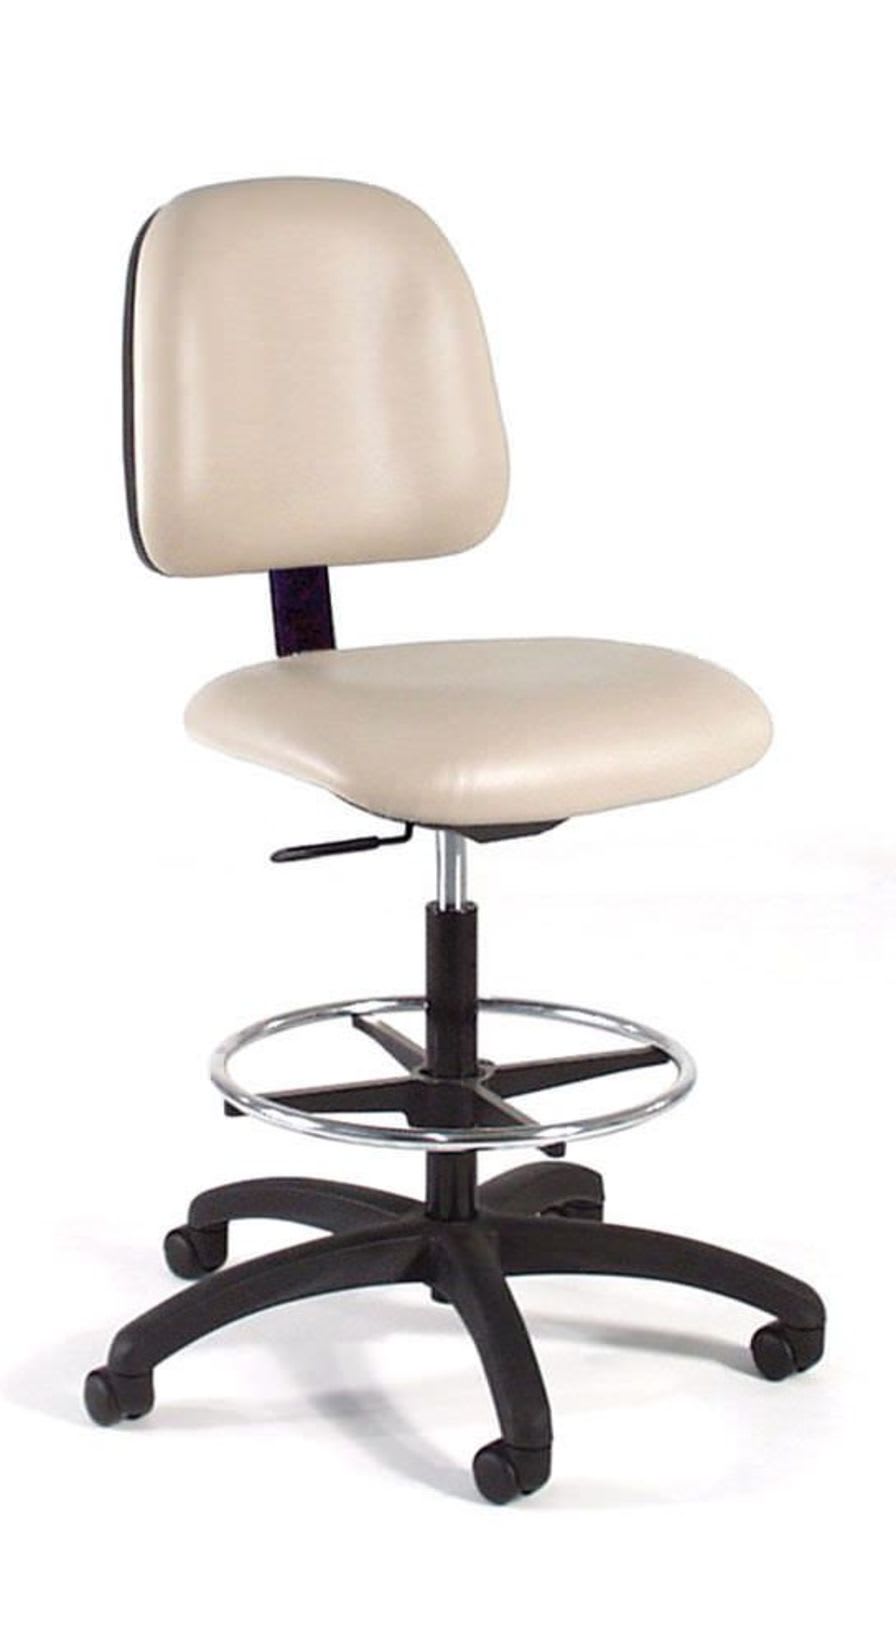 Medical stool / on casters / height-adjustable / with backrest 811 Intensa